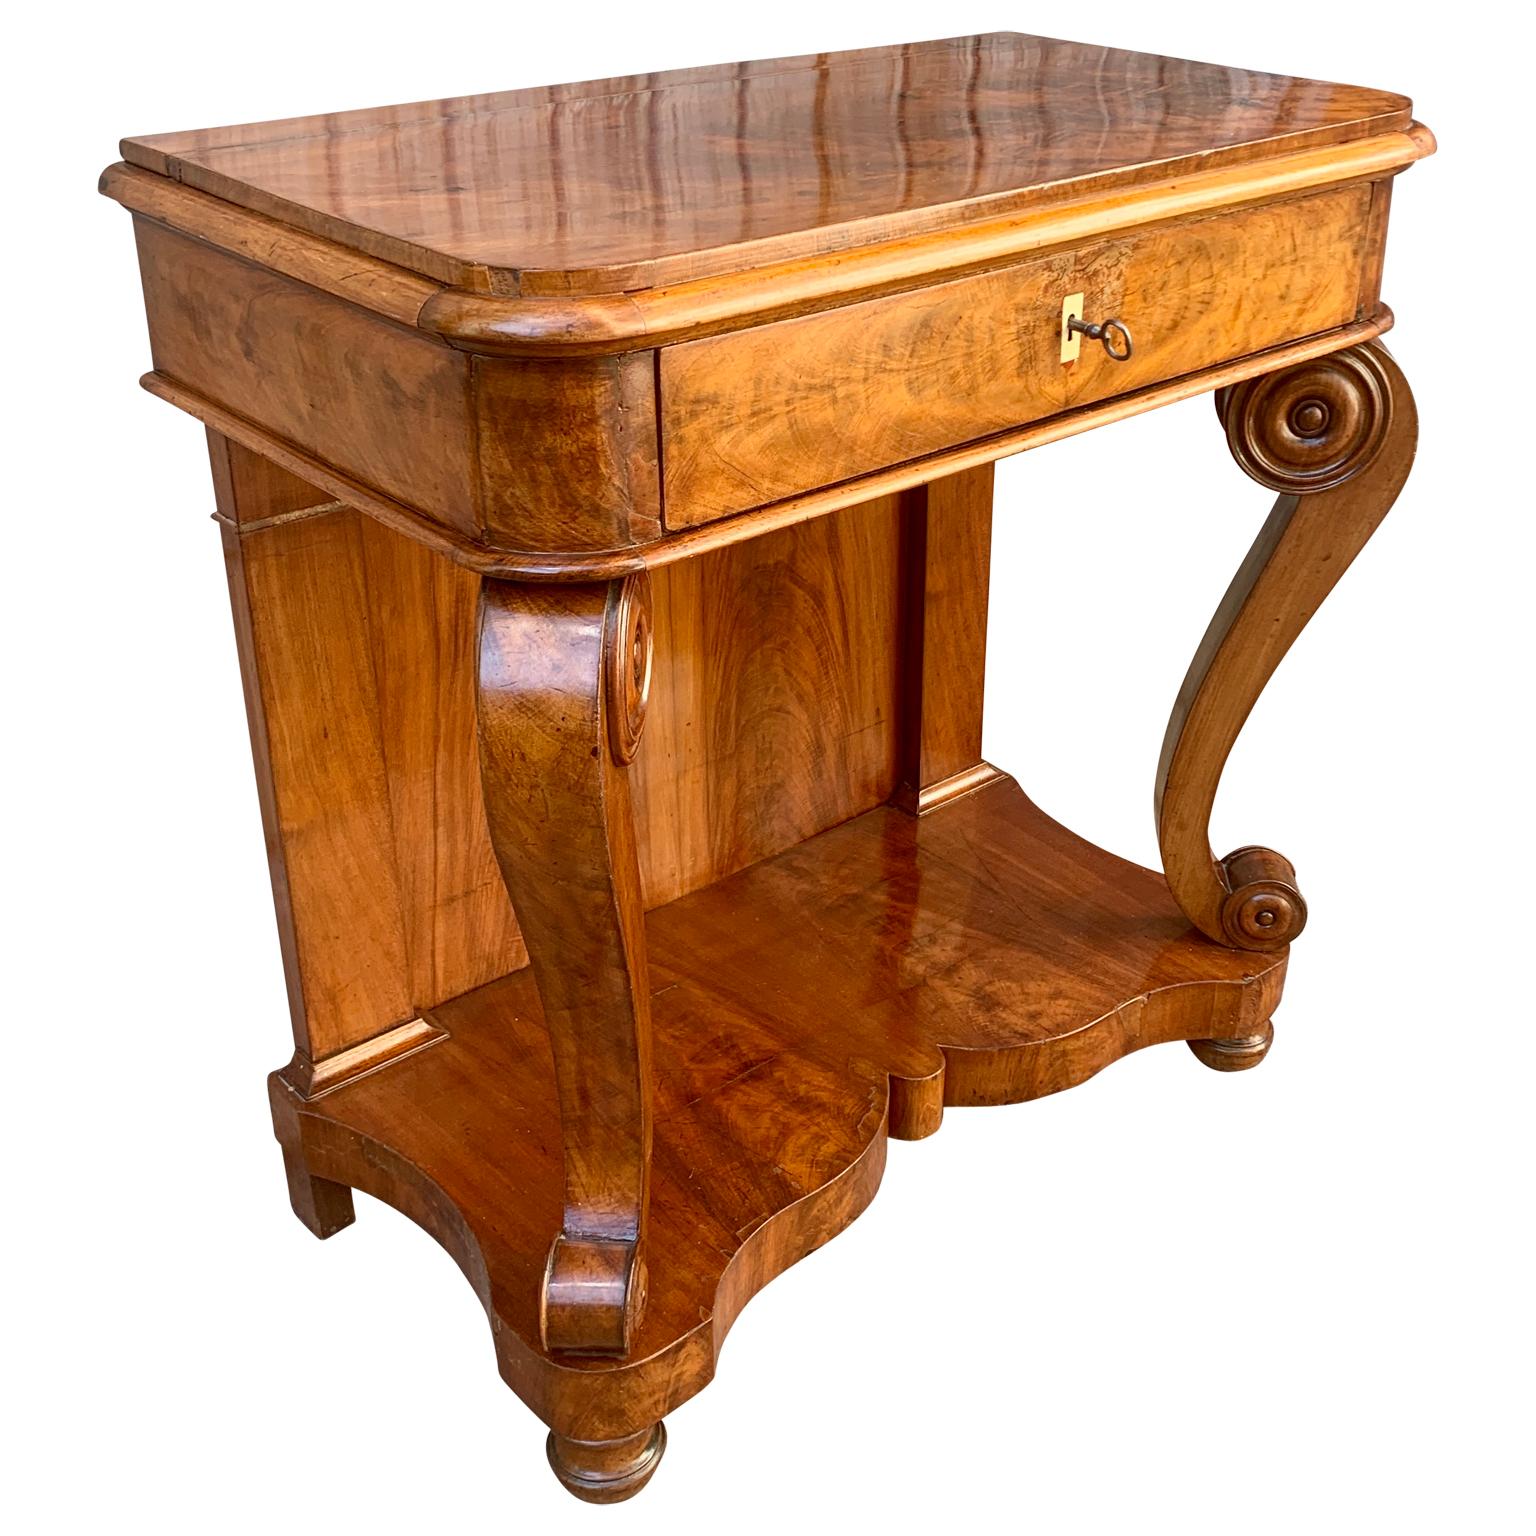 A Scandinavian mahogany early 19th Century Empire table or console. This antique Swedish Biedermeier piece has a drawer with its original working key included and a bottom shelf resting on rounded feet. It is probably made in the Baltic area of